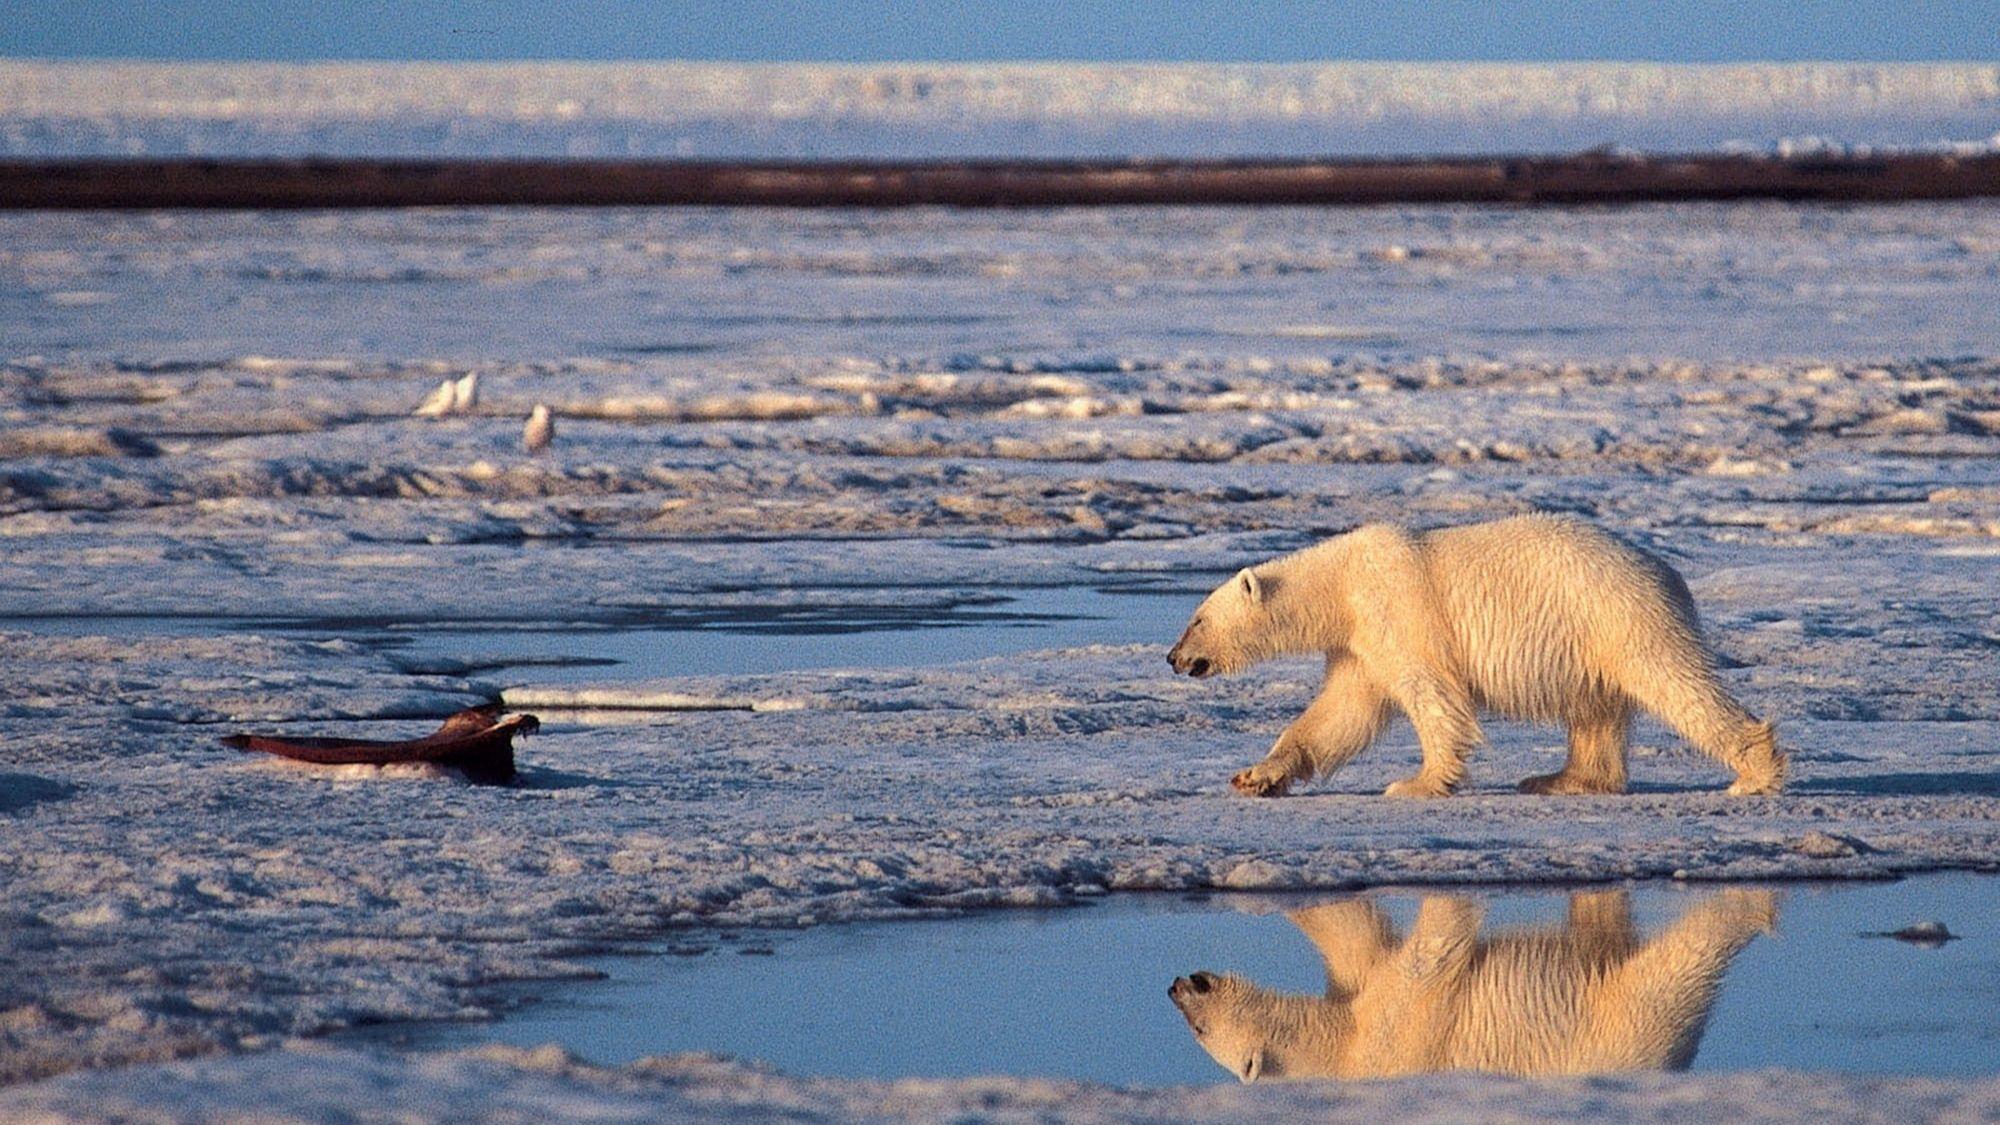 A little extra global warming will mean a lot more habitat loss for